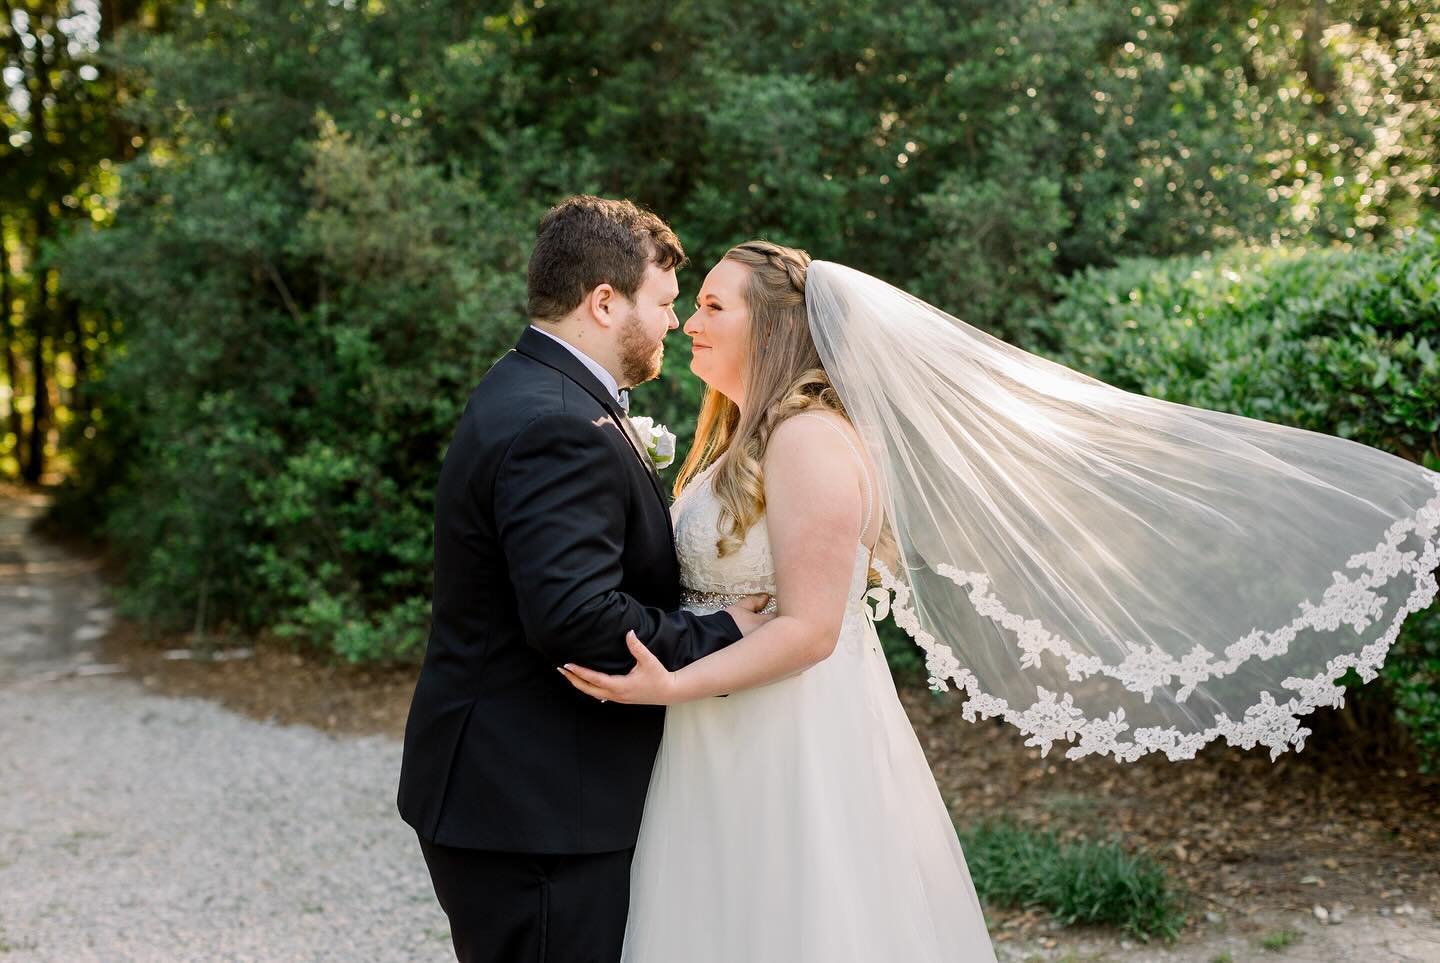 Loved photographing Kendra and Brandon&rsquo;s day so much near Augusta, Georgia! When I saw the light through the trees and her veil, I knew we had to get this shot for them! 😍😍😍